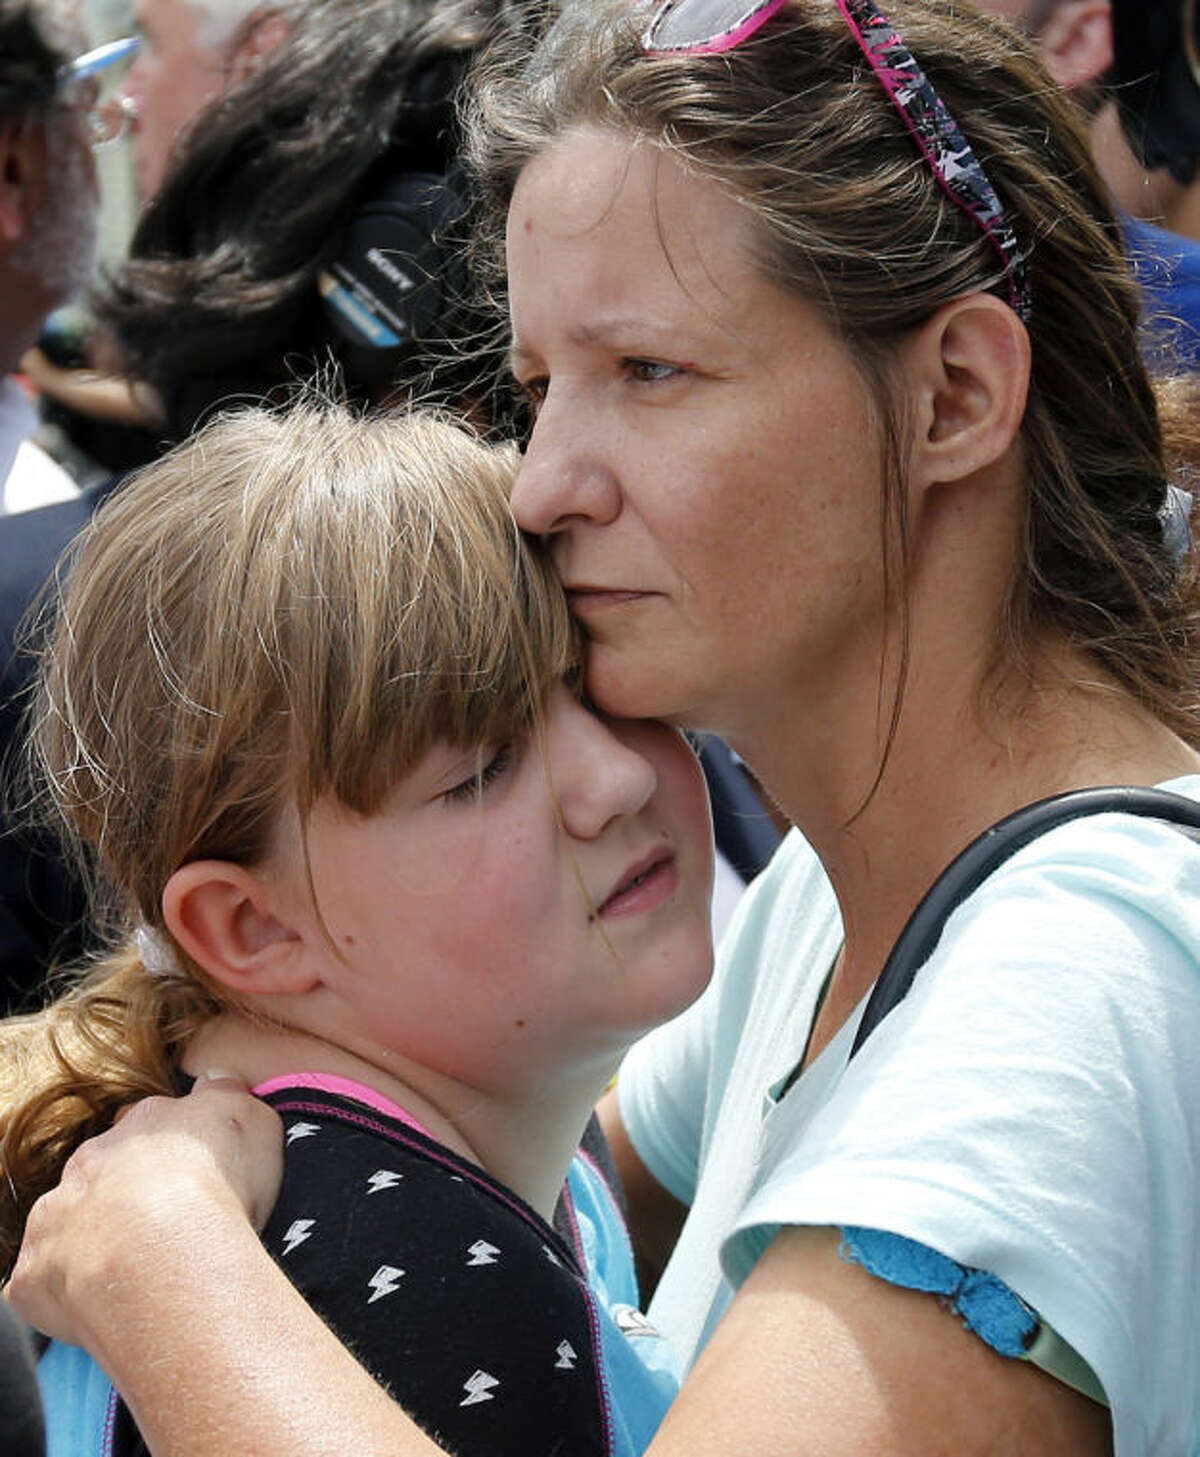 Geri Boyles of Lowell, Mass. hugs her daughter, Corinna, 10, outside a burned three-story apartment and business building in Lowell, Thursday, July 10, 2014. The neighbors lost people they knew in the fast-moving pre-dawn fire where officials said seven people died. (AP Photo/Elise Amendola)